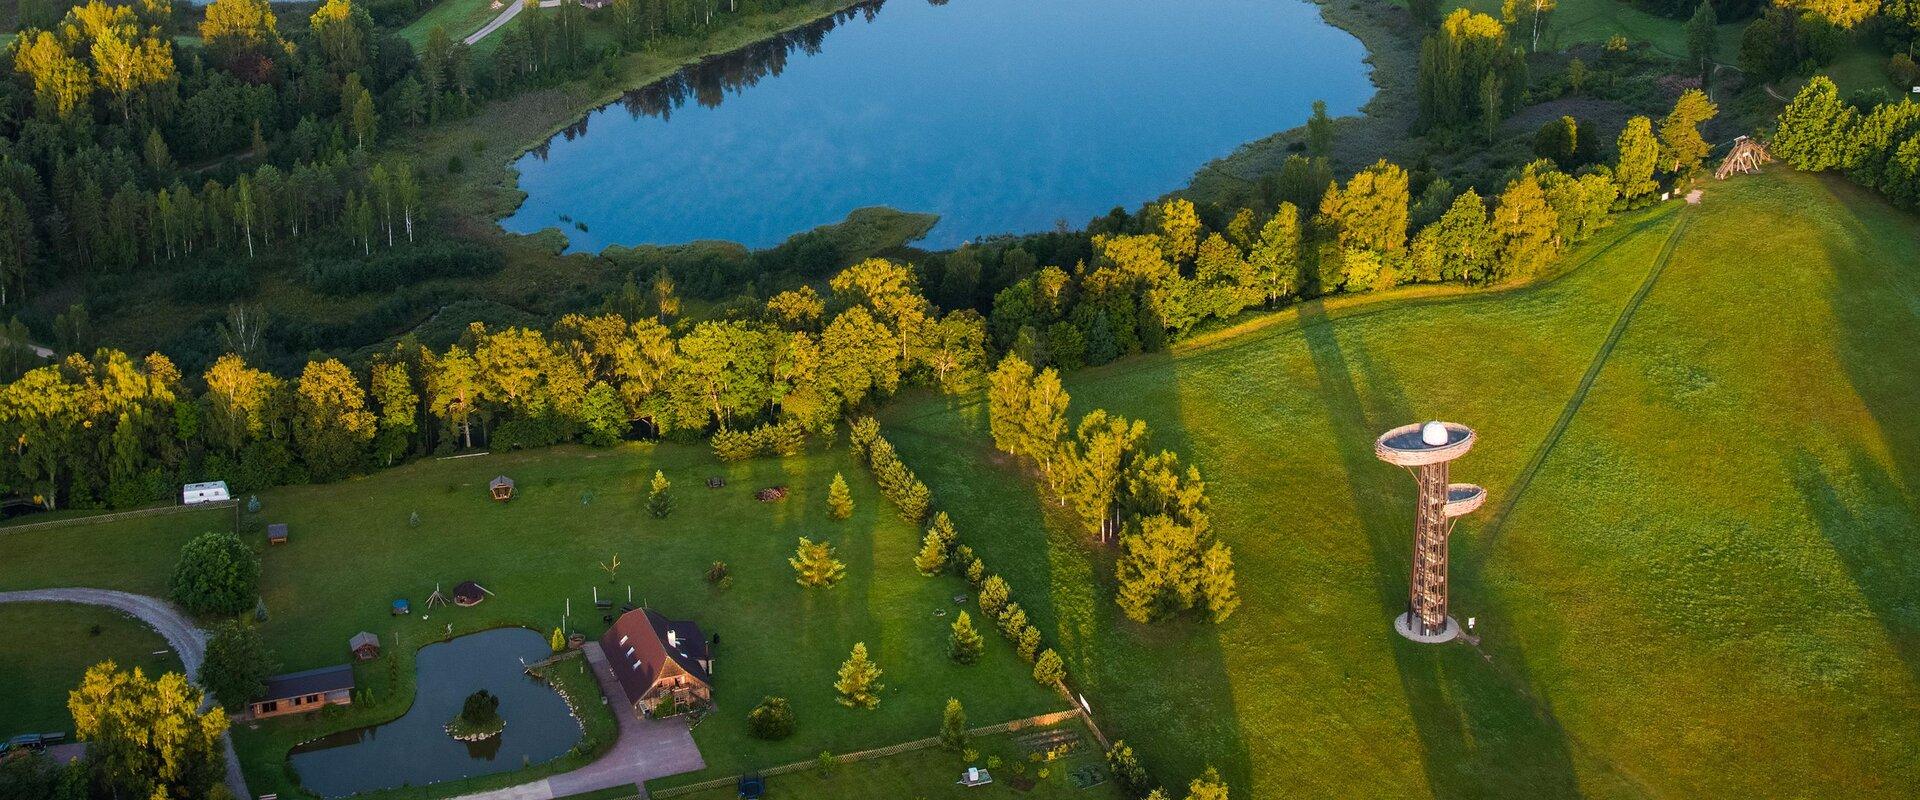 A convenient holiday complex on the edge of Ööbikuoru - the most beautiful valley in Estonia. Tindioru is surrounded by a diverse landscape, dark blue